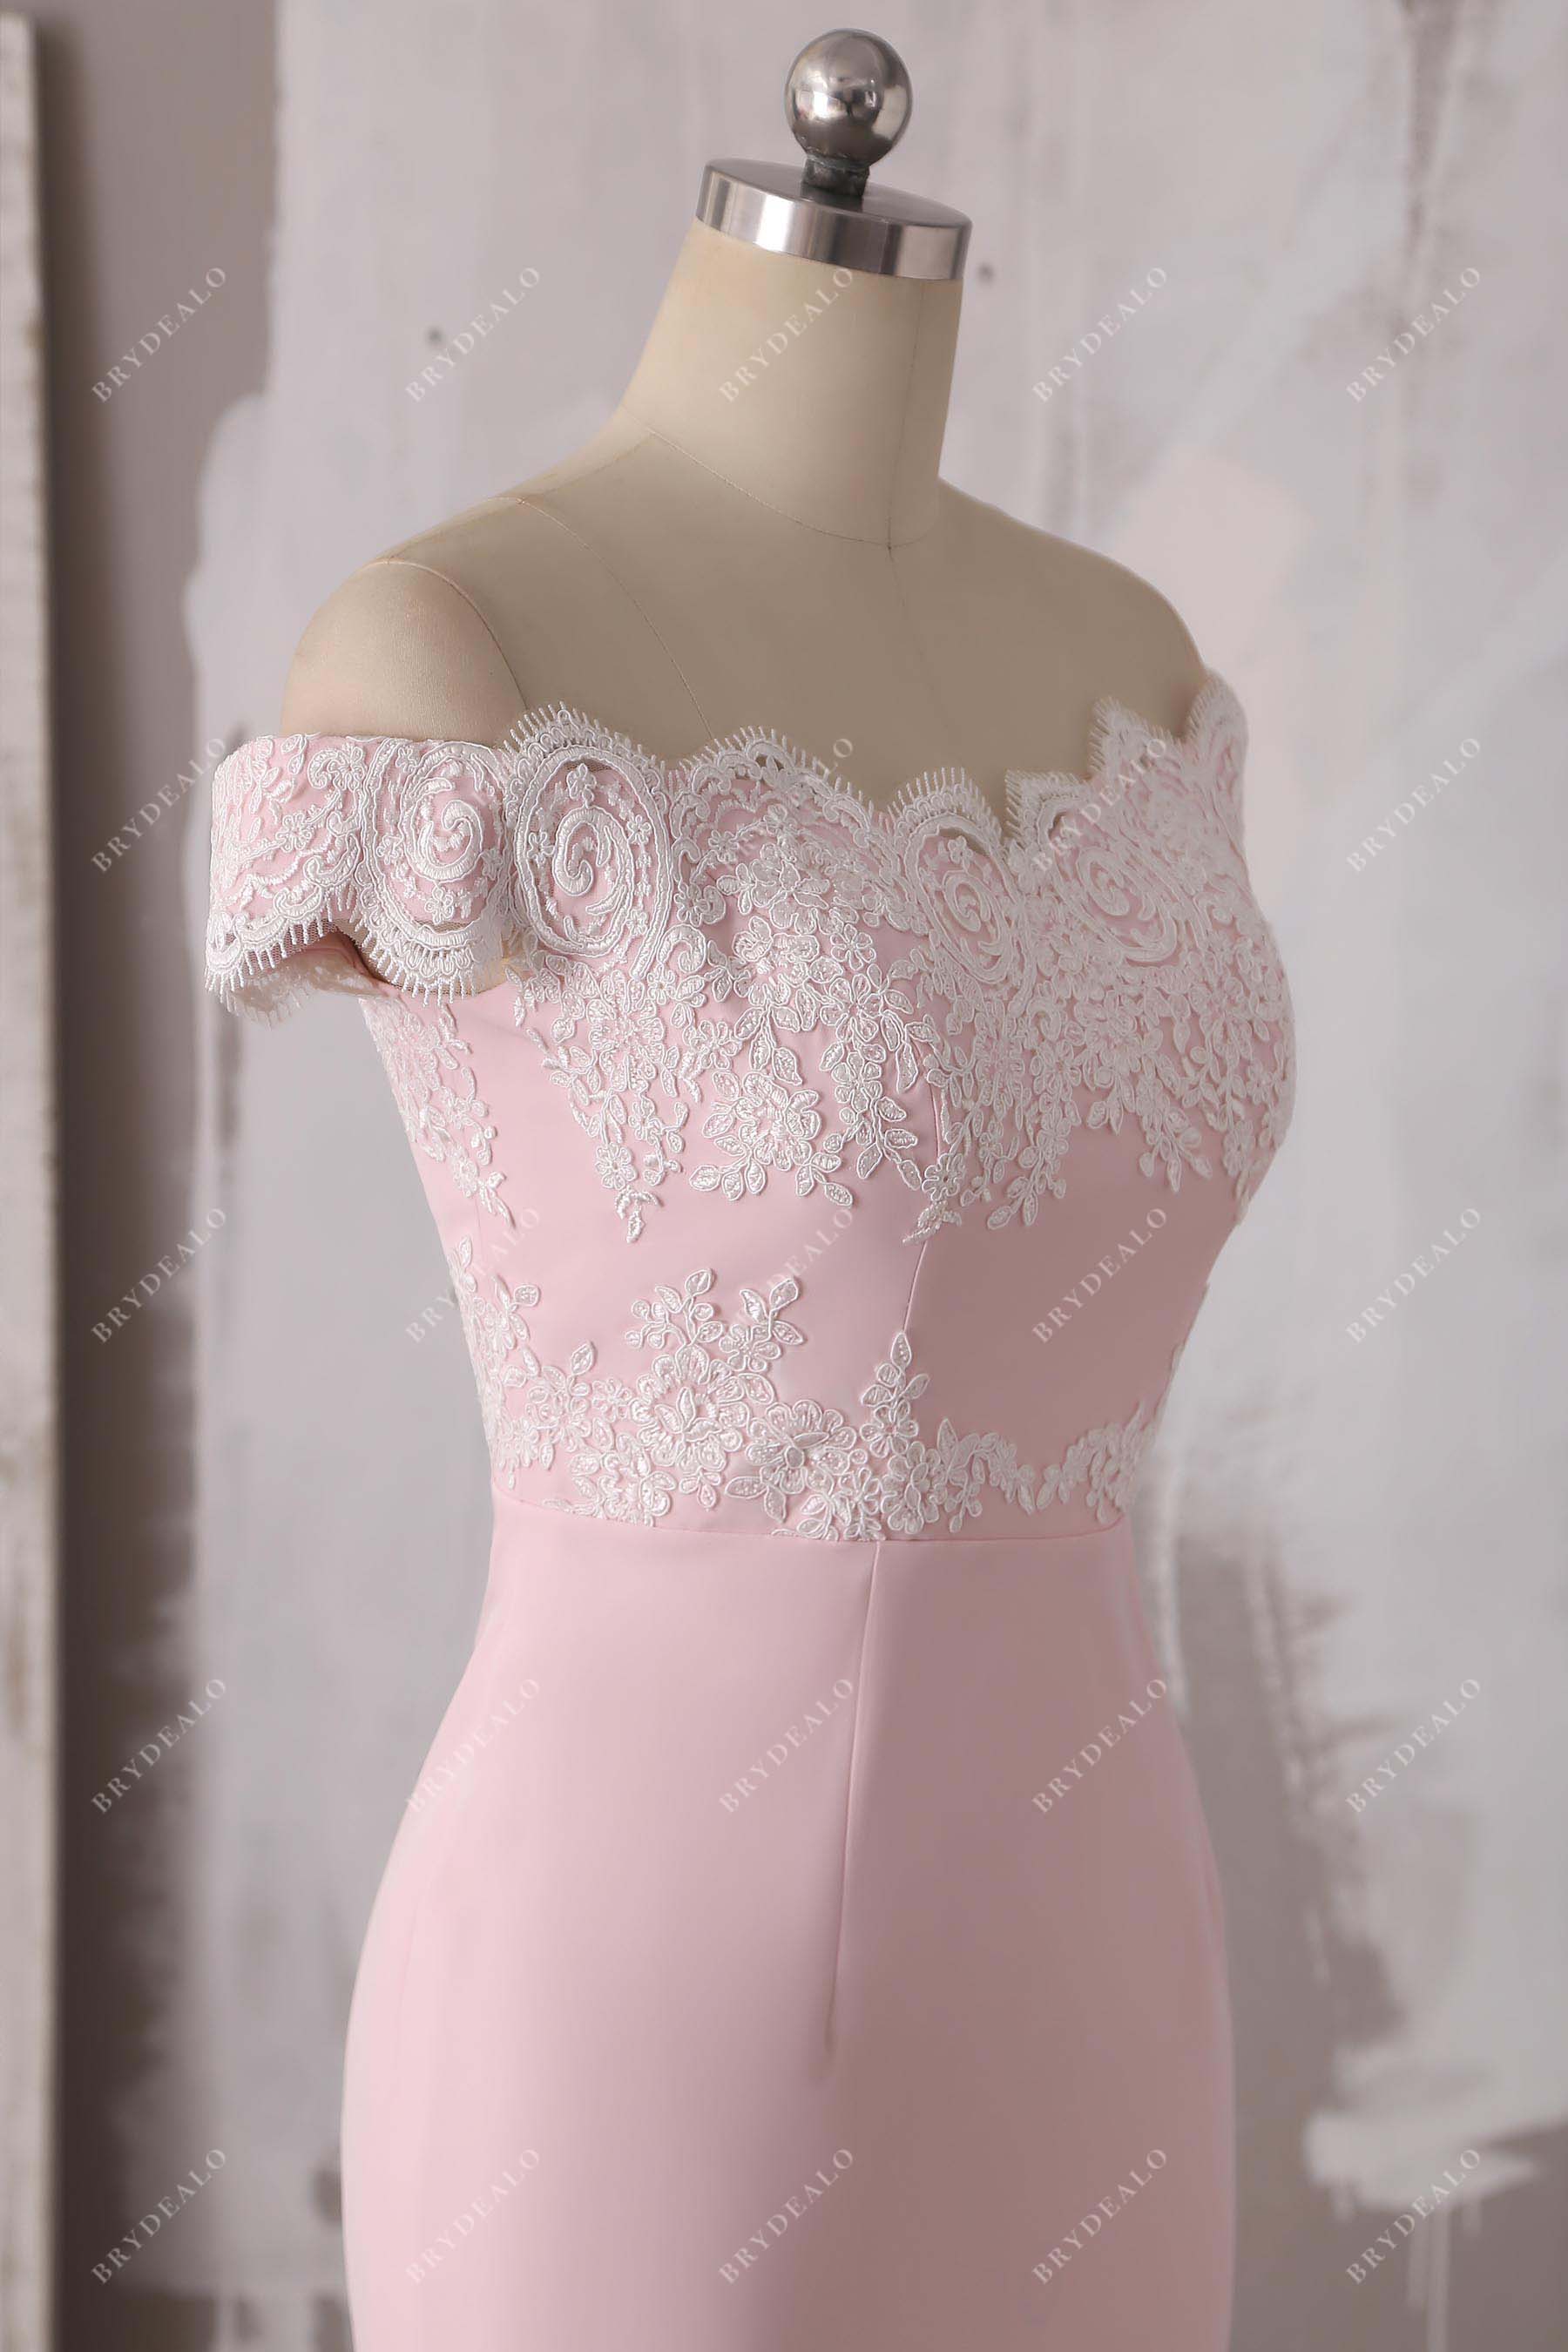 ivory scalloped lace applique dress